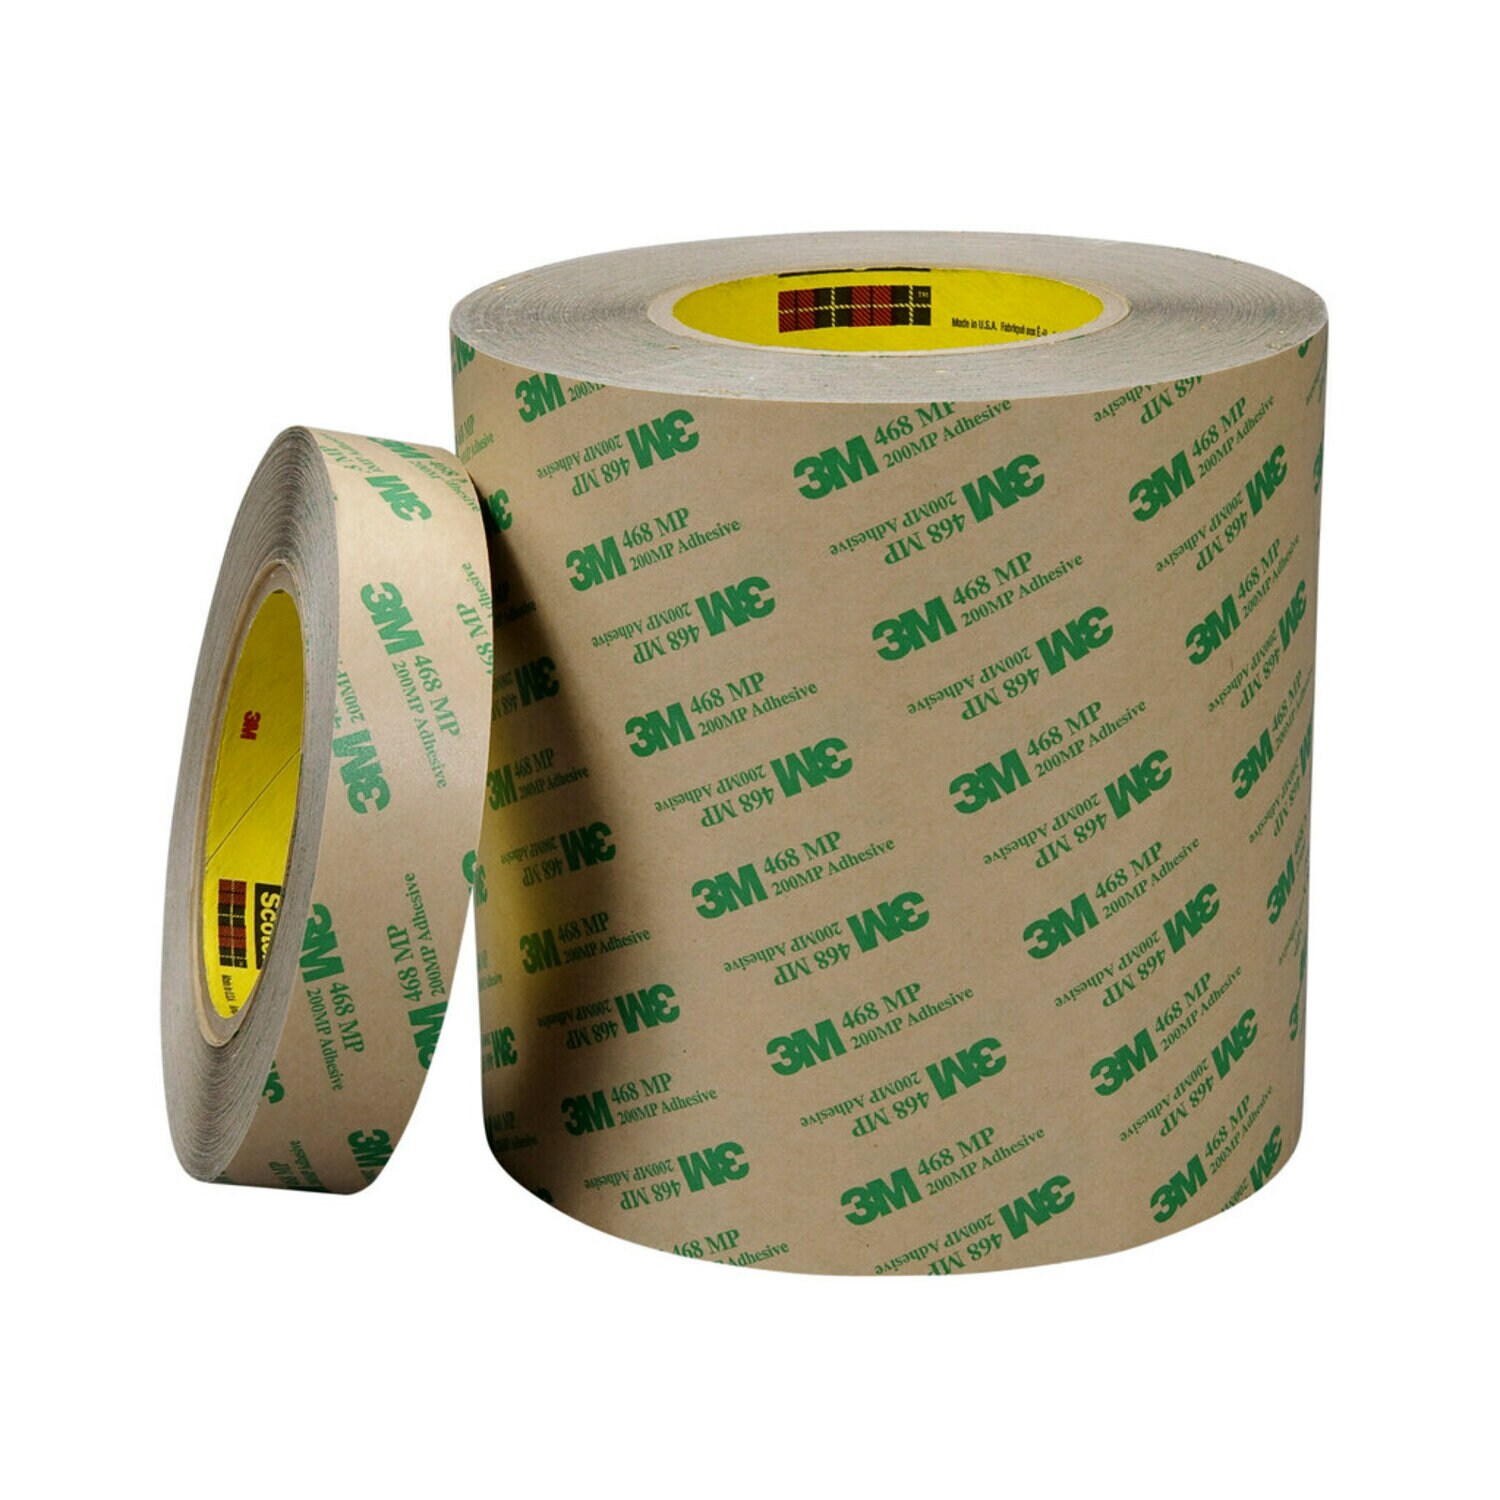 7000028936 - 3M Adhesive Transfer Tape 468MP, Clear, 24 in x 120 yd, 5 mil, 1 roll
per case